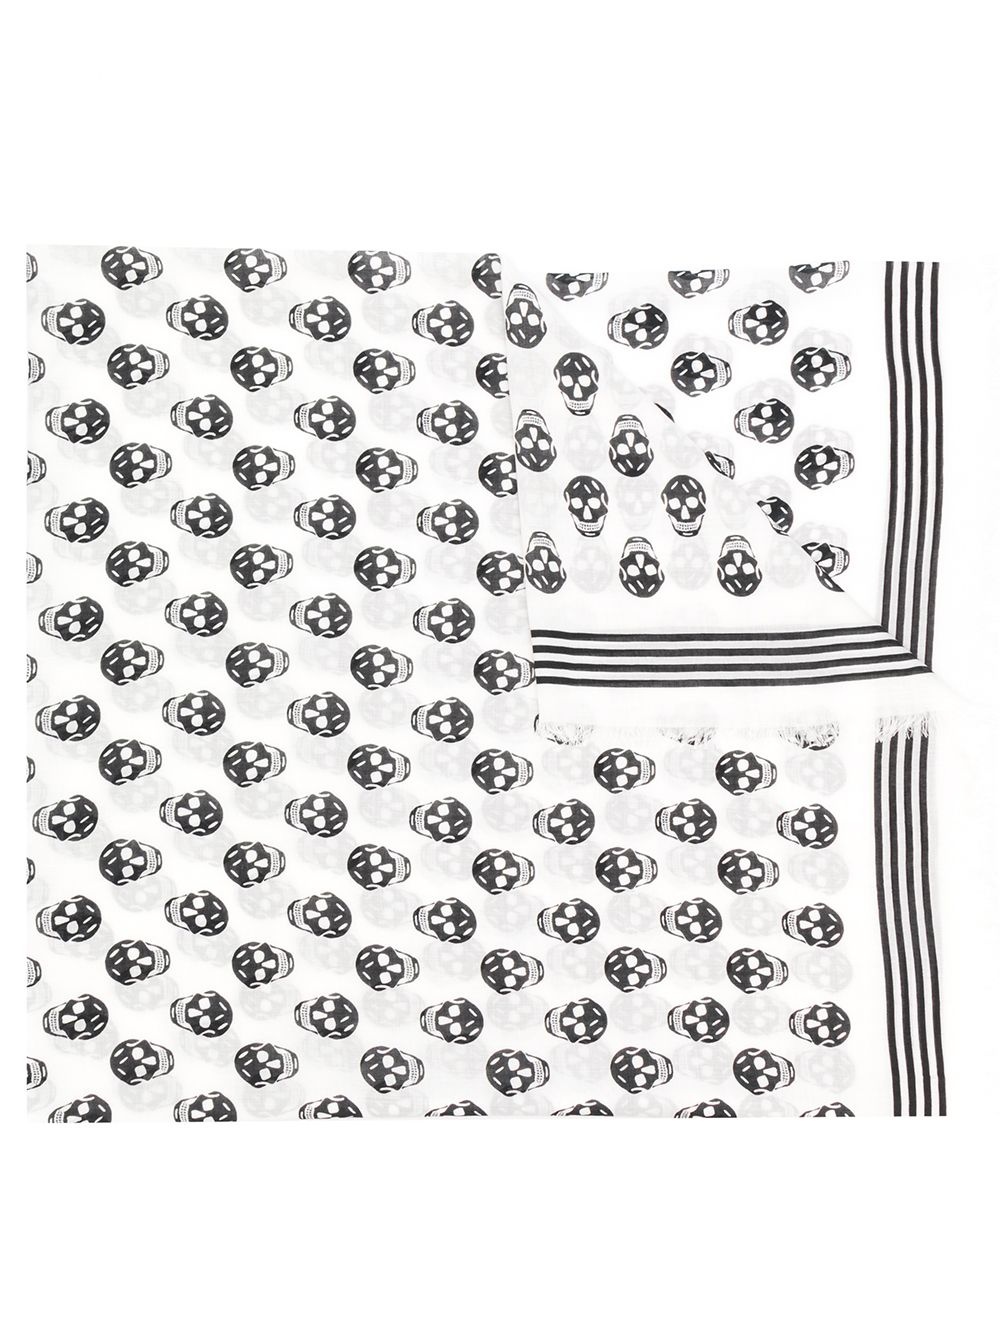 Scarf with logo - 1